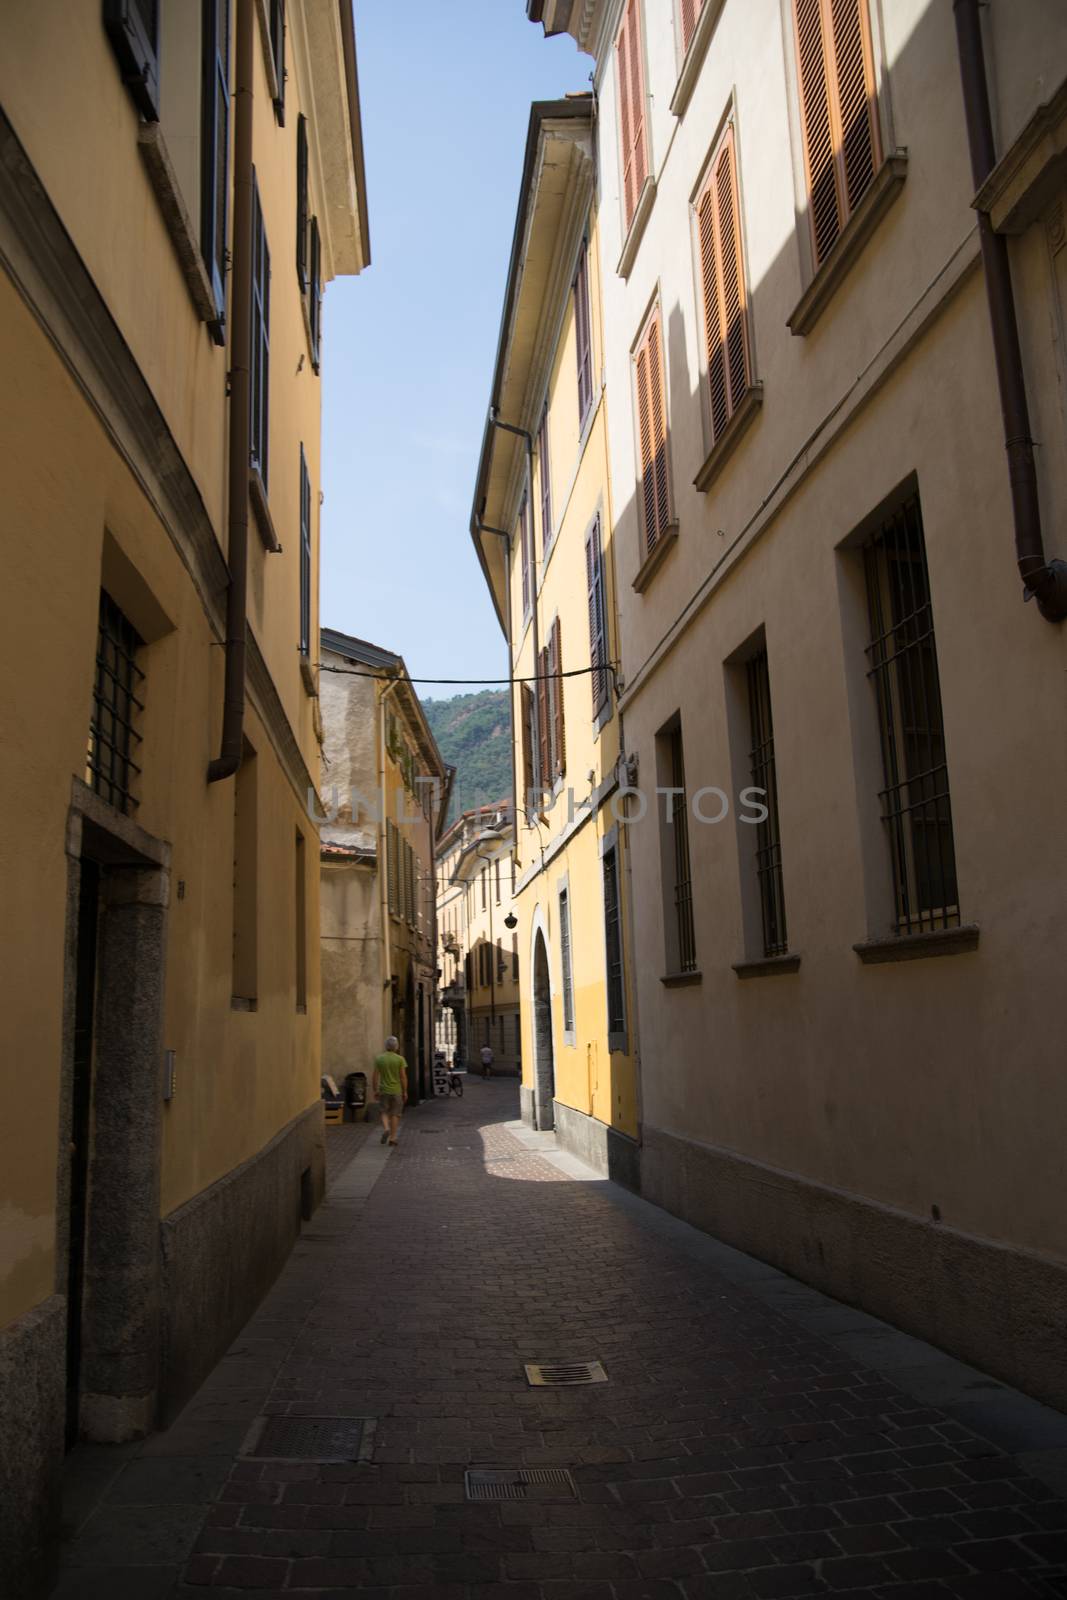 Romantic atmosphere of small italian town in lombardy